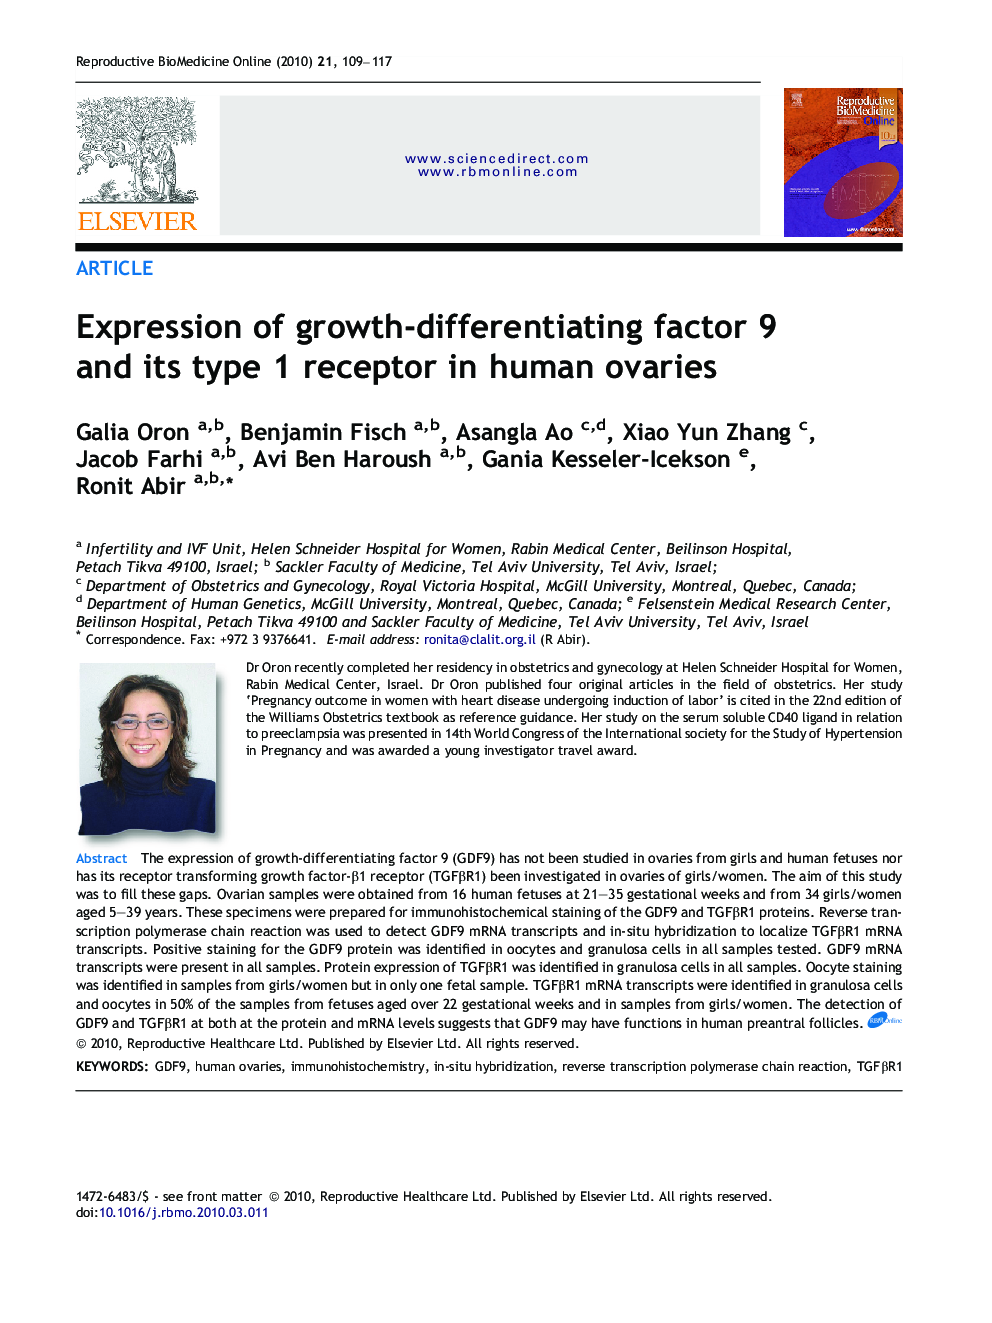 Expression of growth-differentiating factor 9 and its type 1 receptor in human ovaries